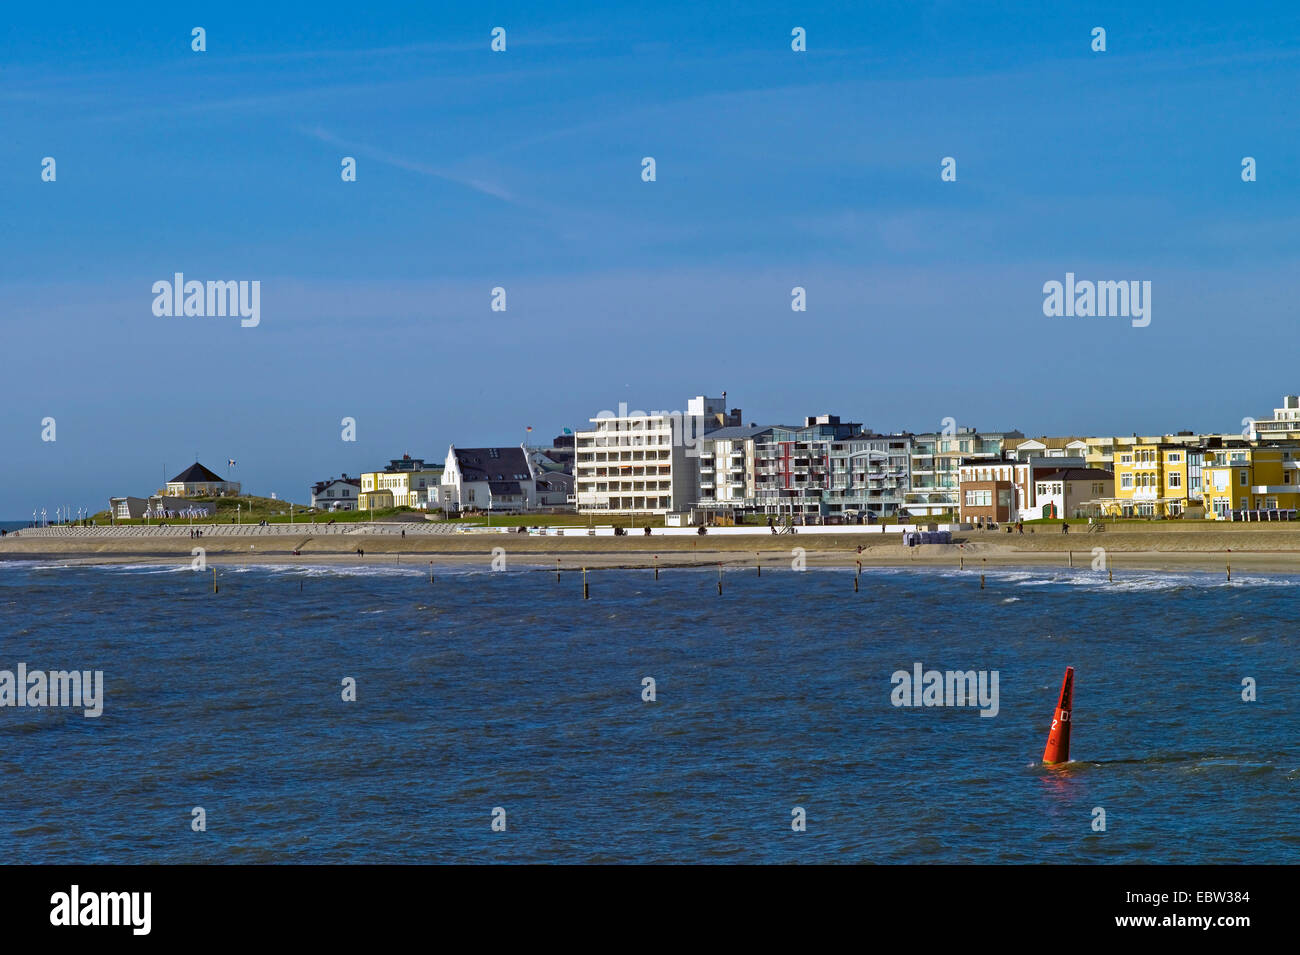 view from North Sea to Norderney, Germany, Lower Saxony, Norderney Stock Photo